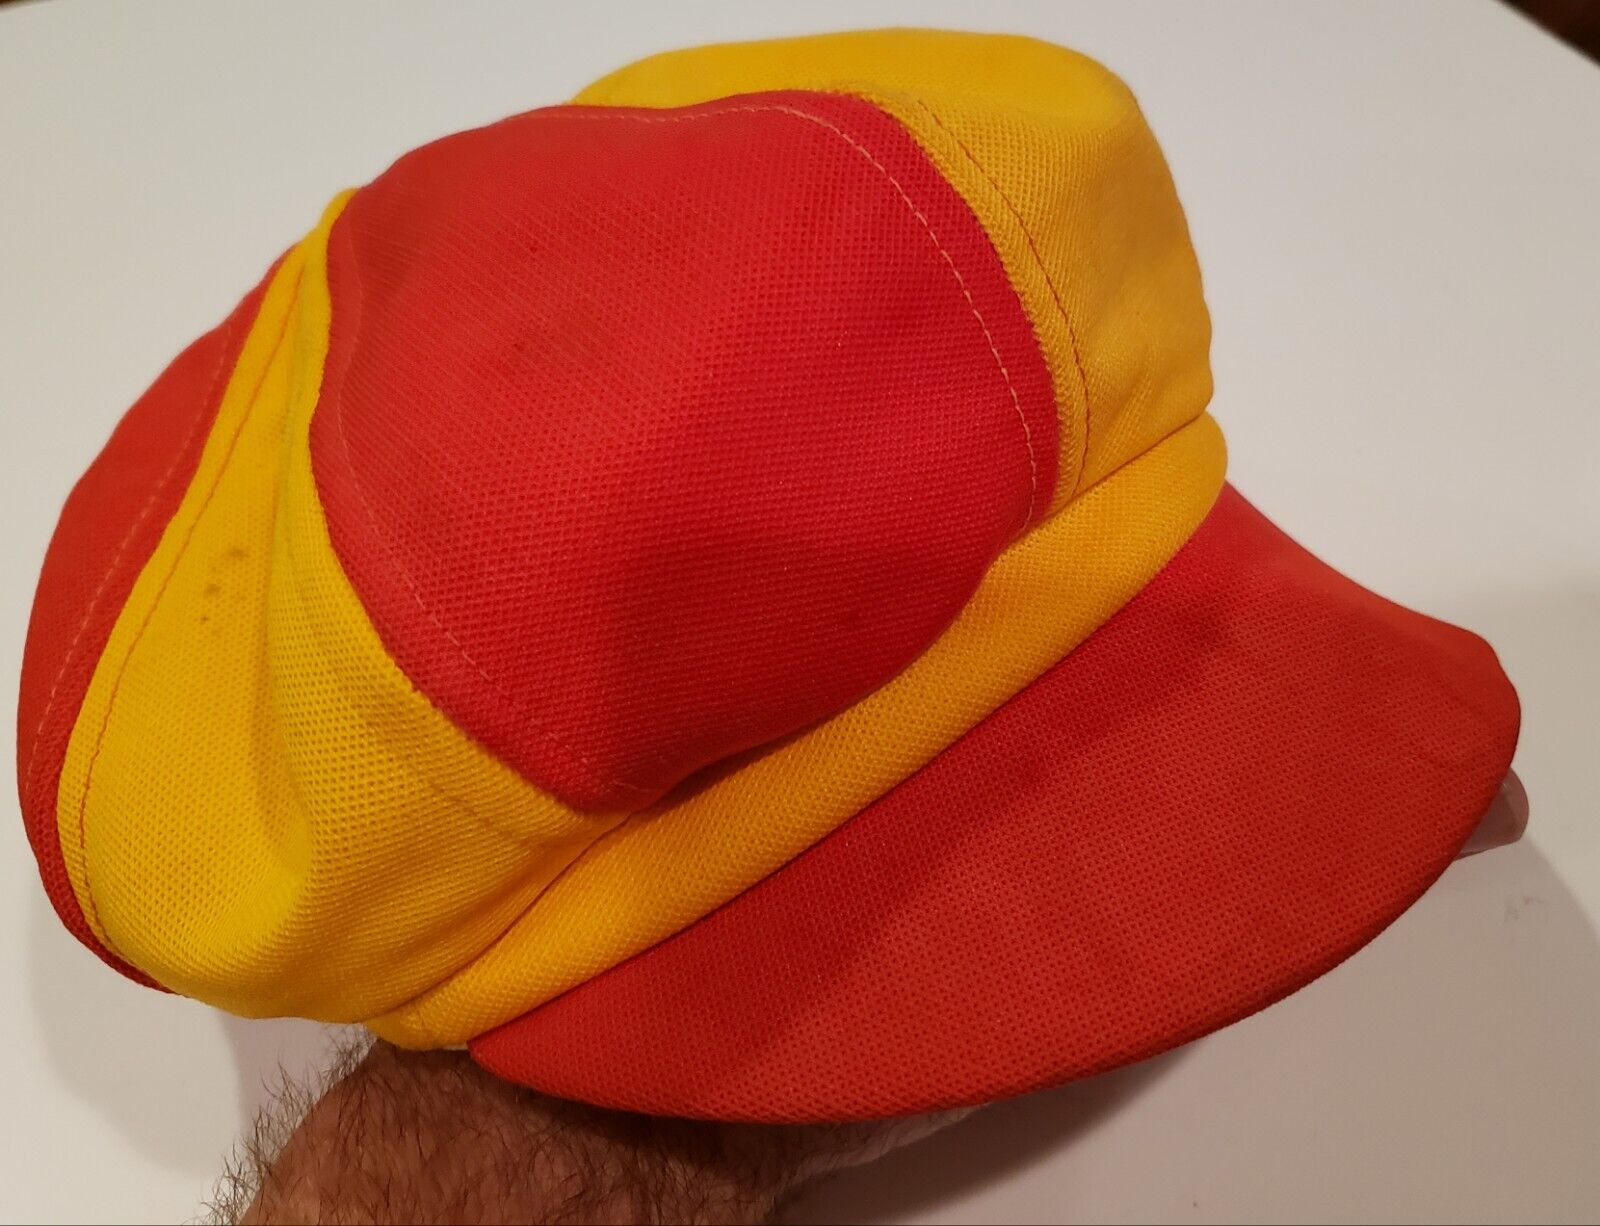 EXTREMELY RARE 1970's Era BURGER KING Employee Worker Hat  with Tag. Size Small